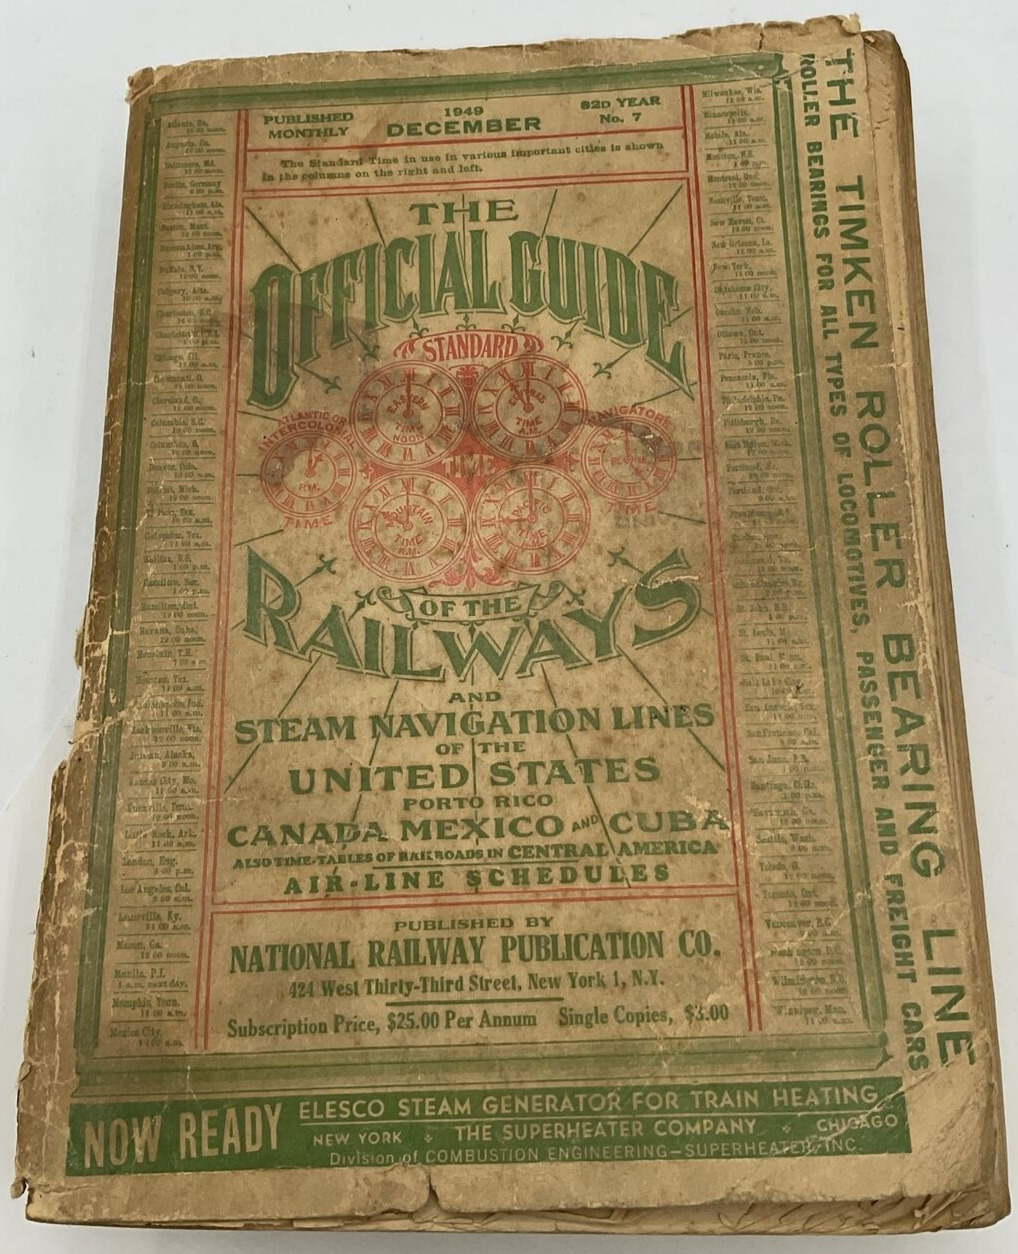 December 1949 Official Guide Railway Steam Navigation Lines Maps Timetable